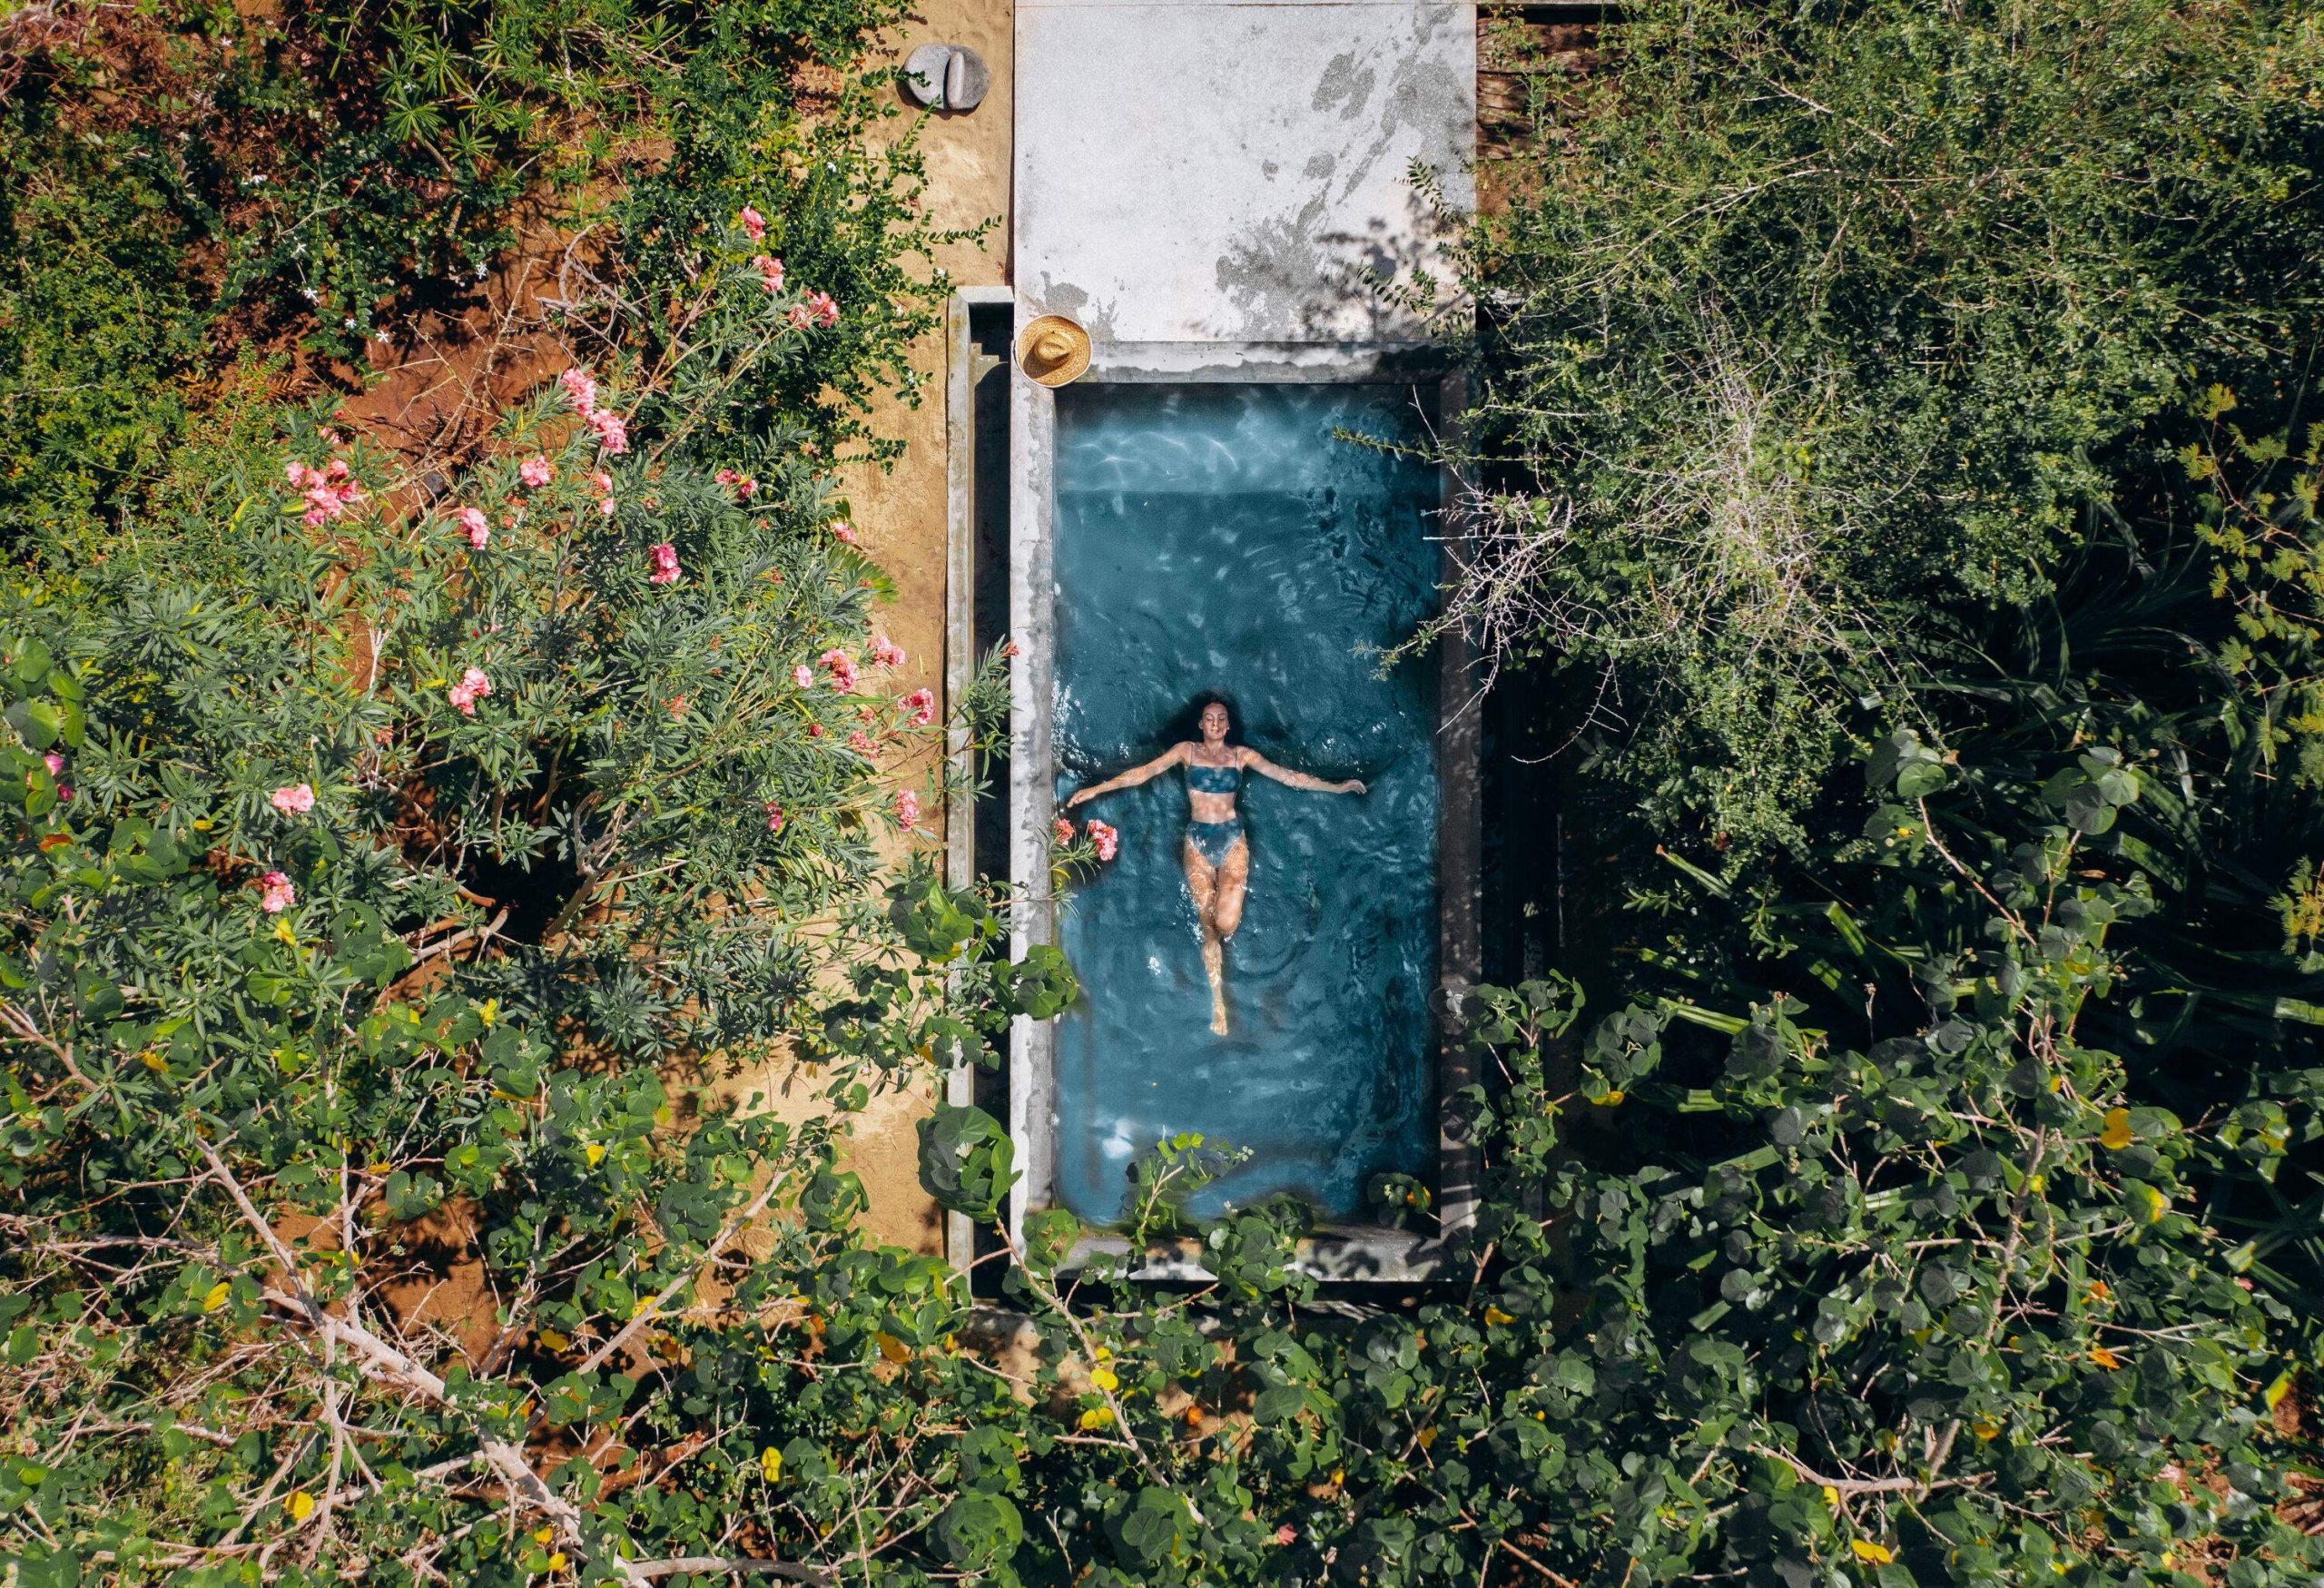 A woman swims on her back in a small pool surrounded by lush plants.